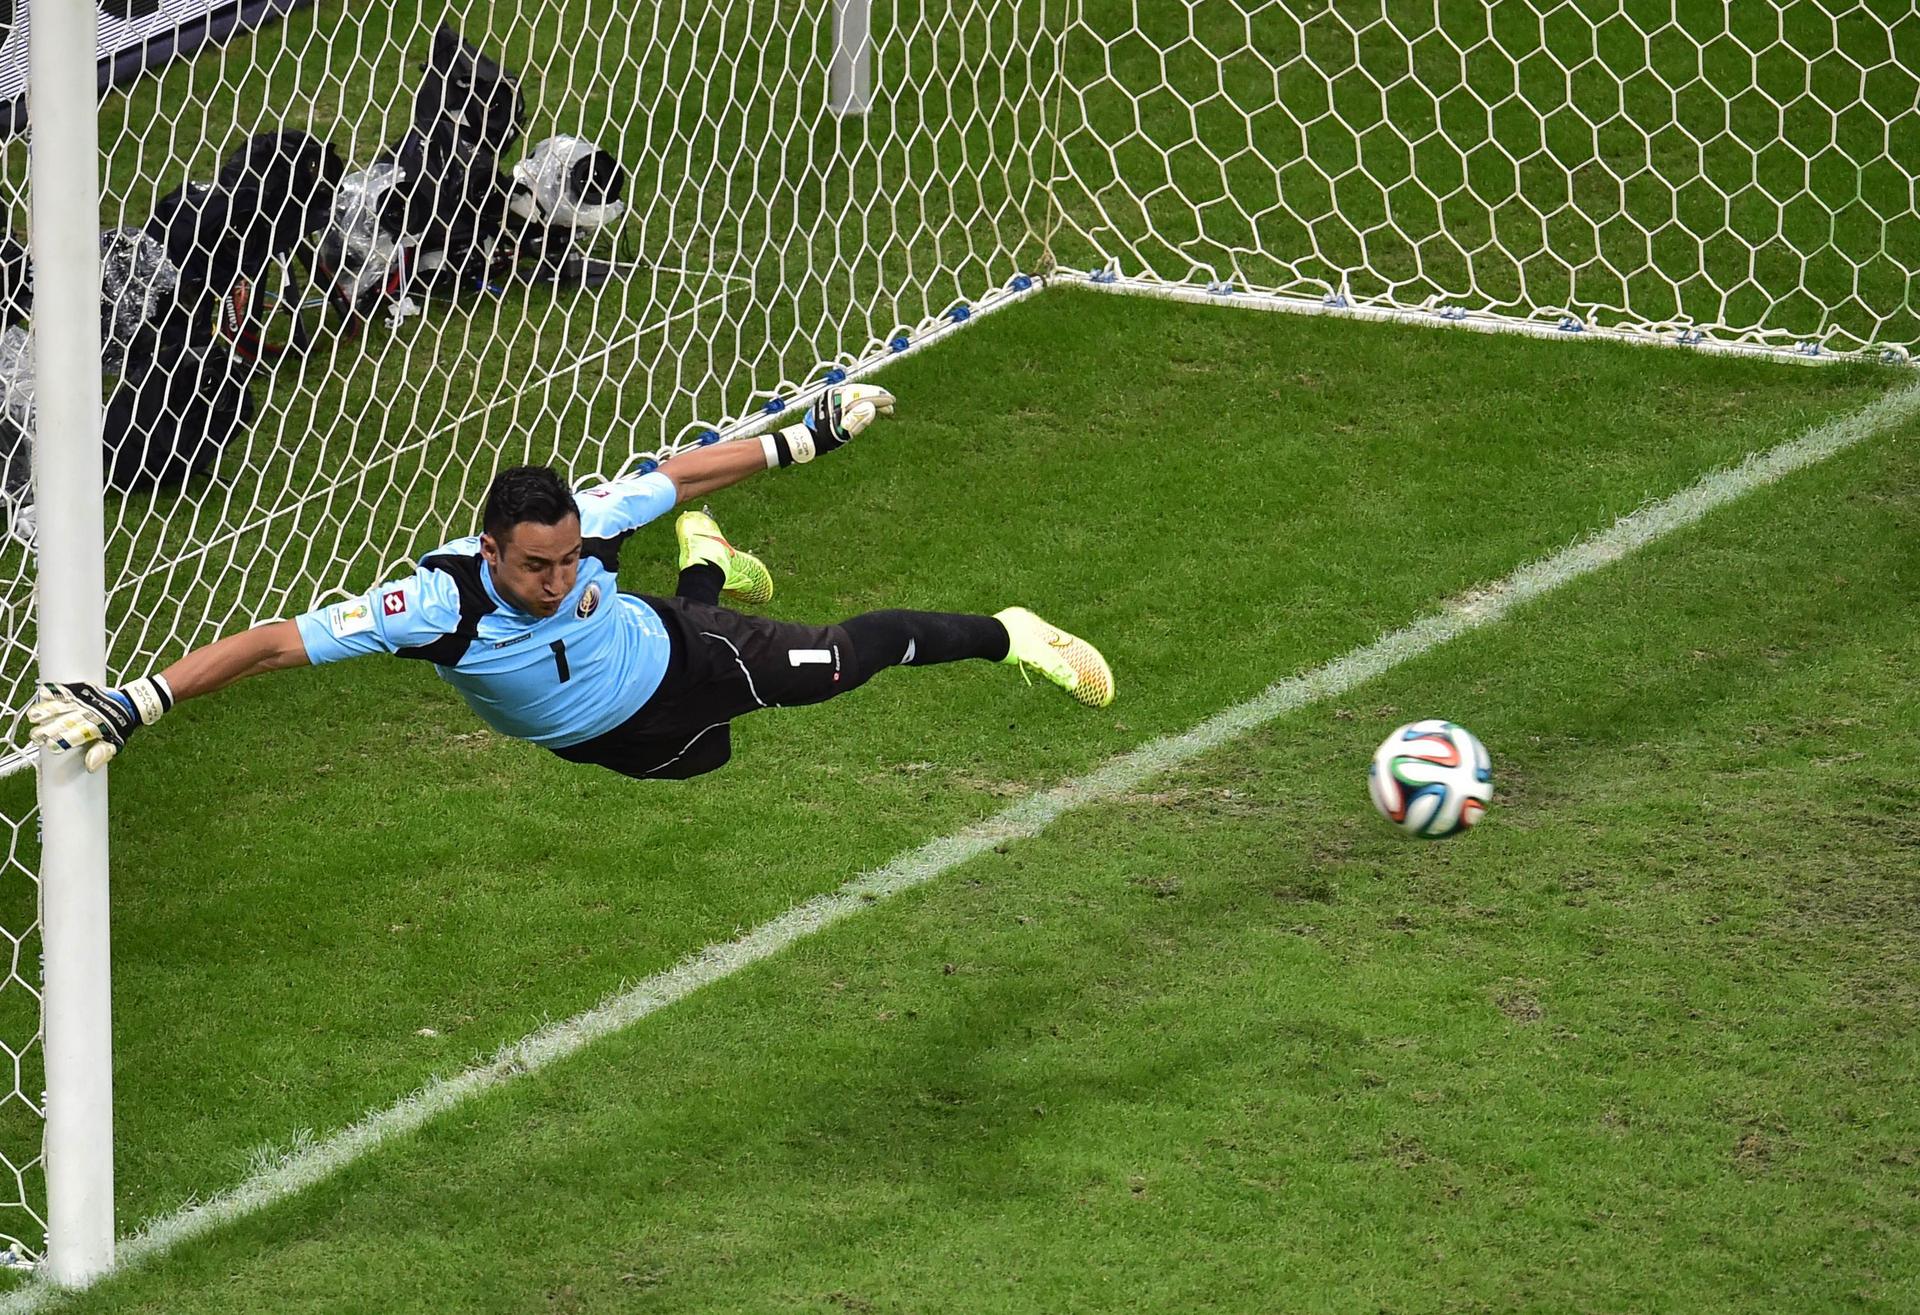 Costa Rica's Keylor Navas won three man-of-the-match awards and conceded just once from open play in 510 minutes. Photo: AFP